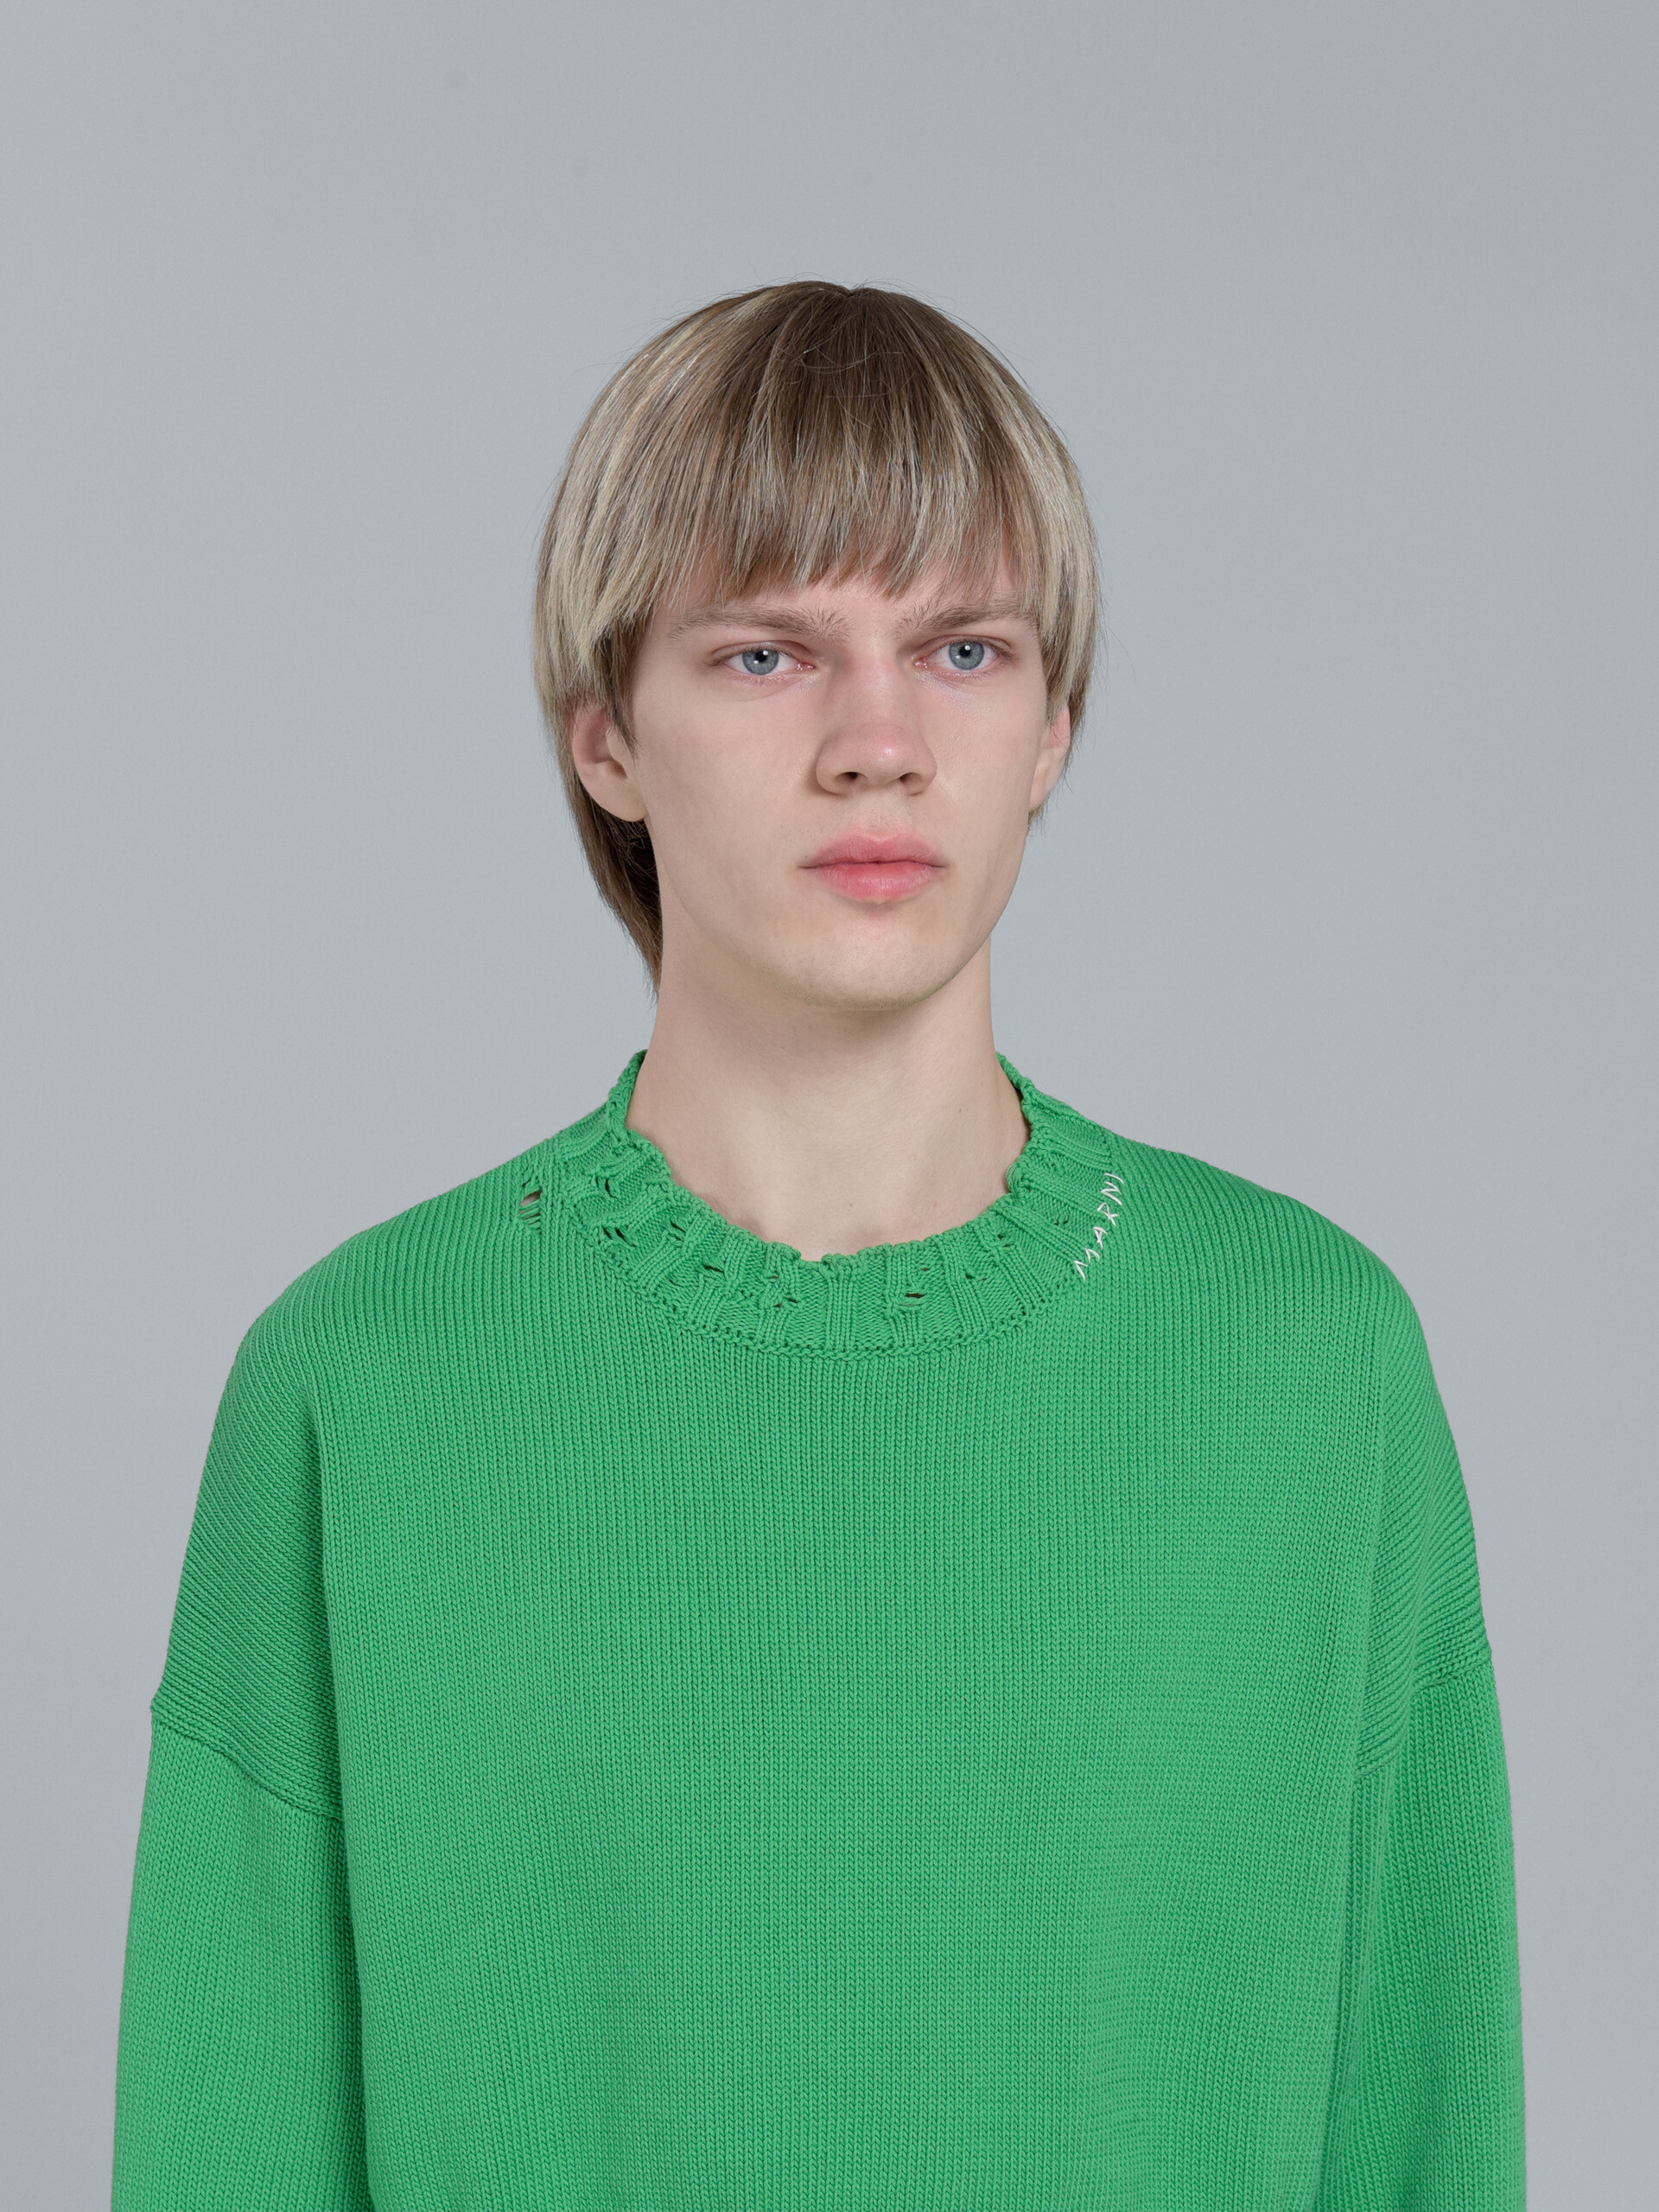 Green cotton crewneck sweater - Pullovers - Image 4